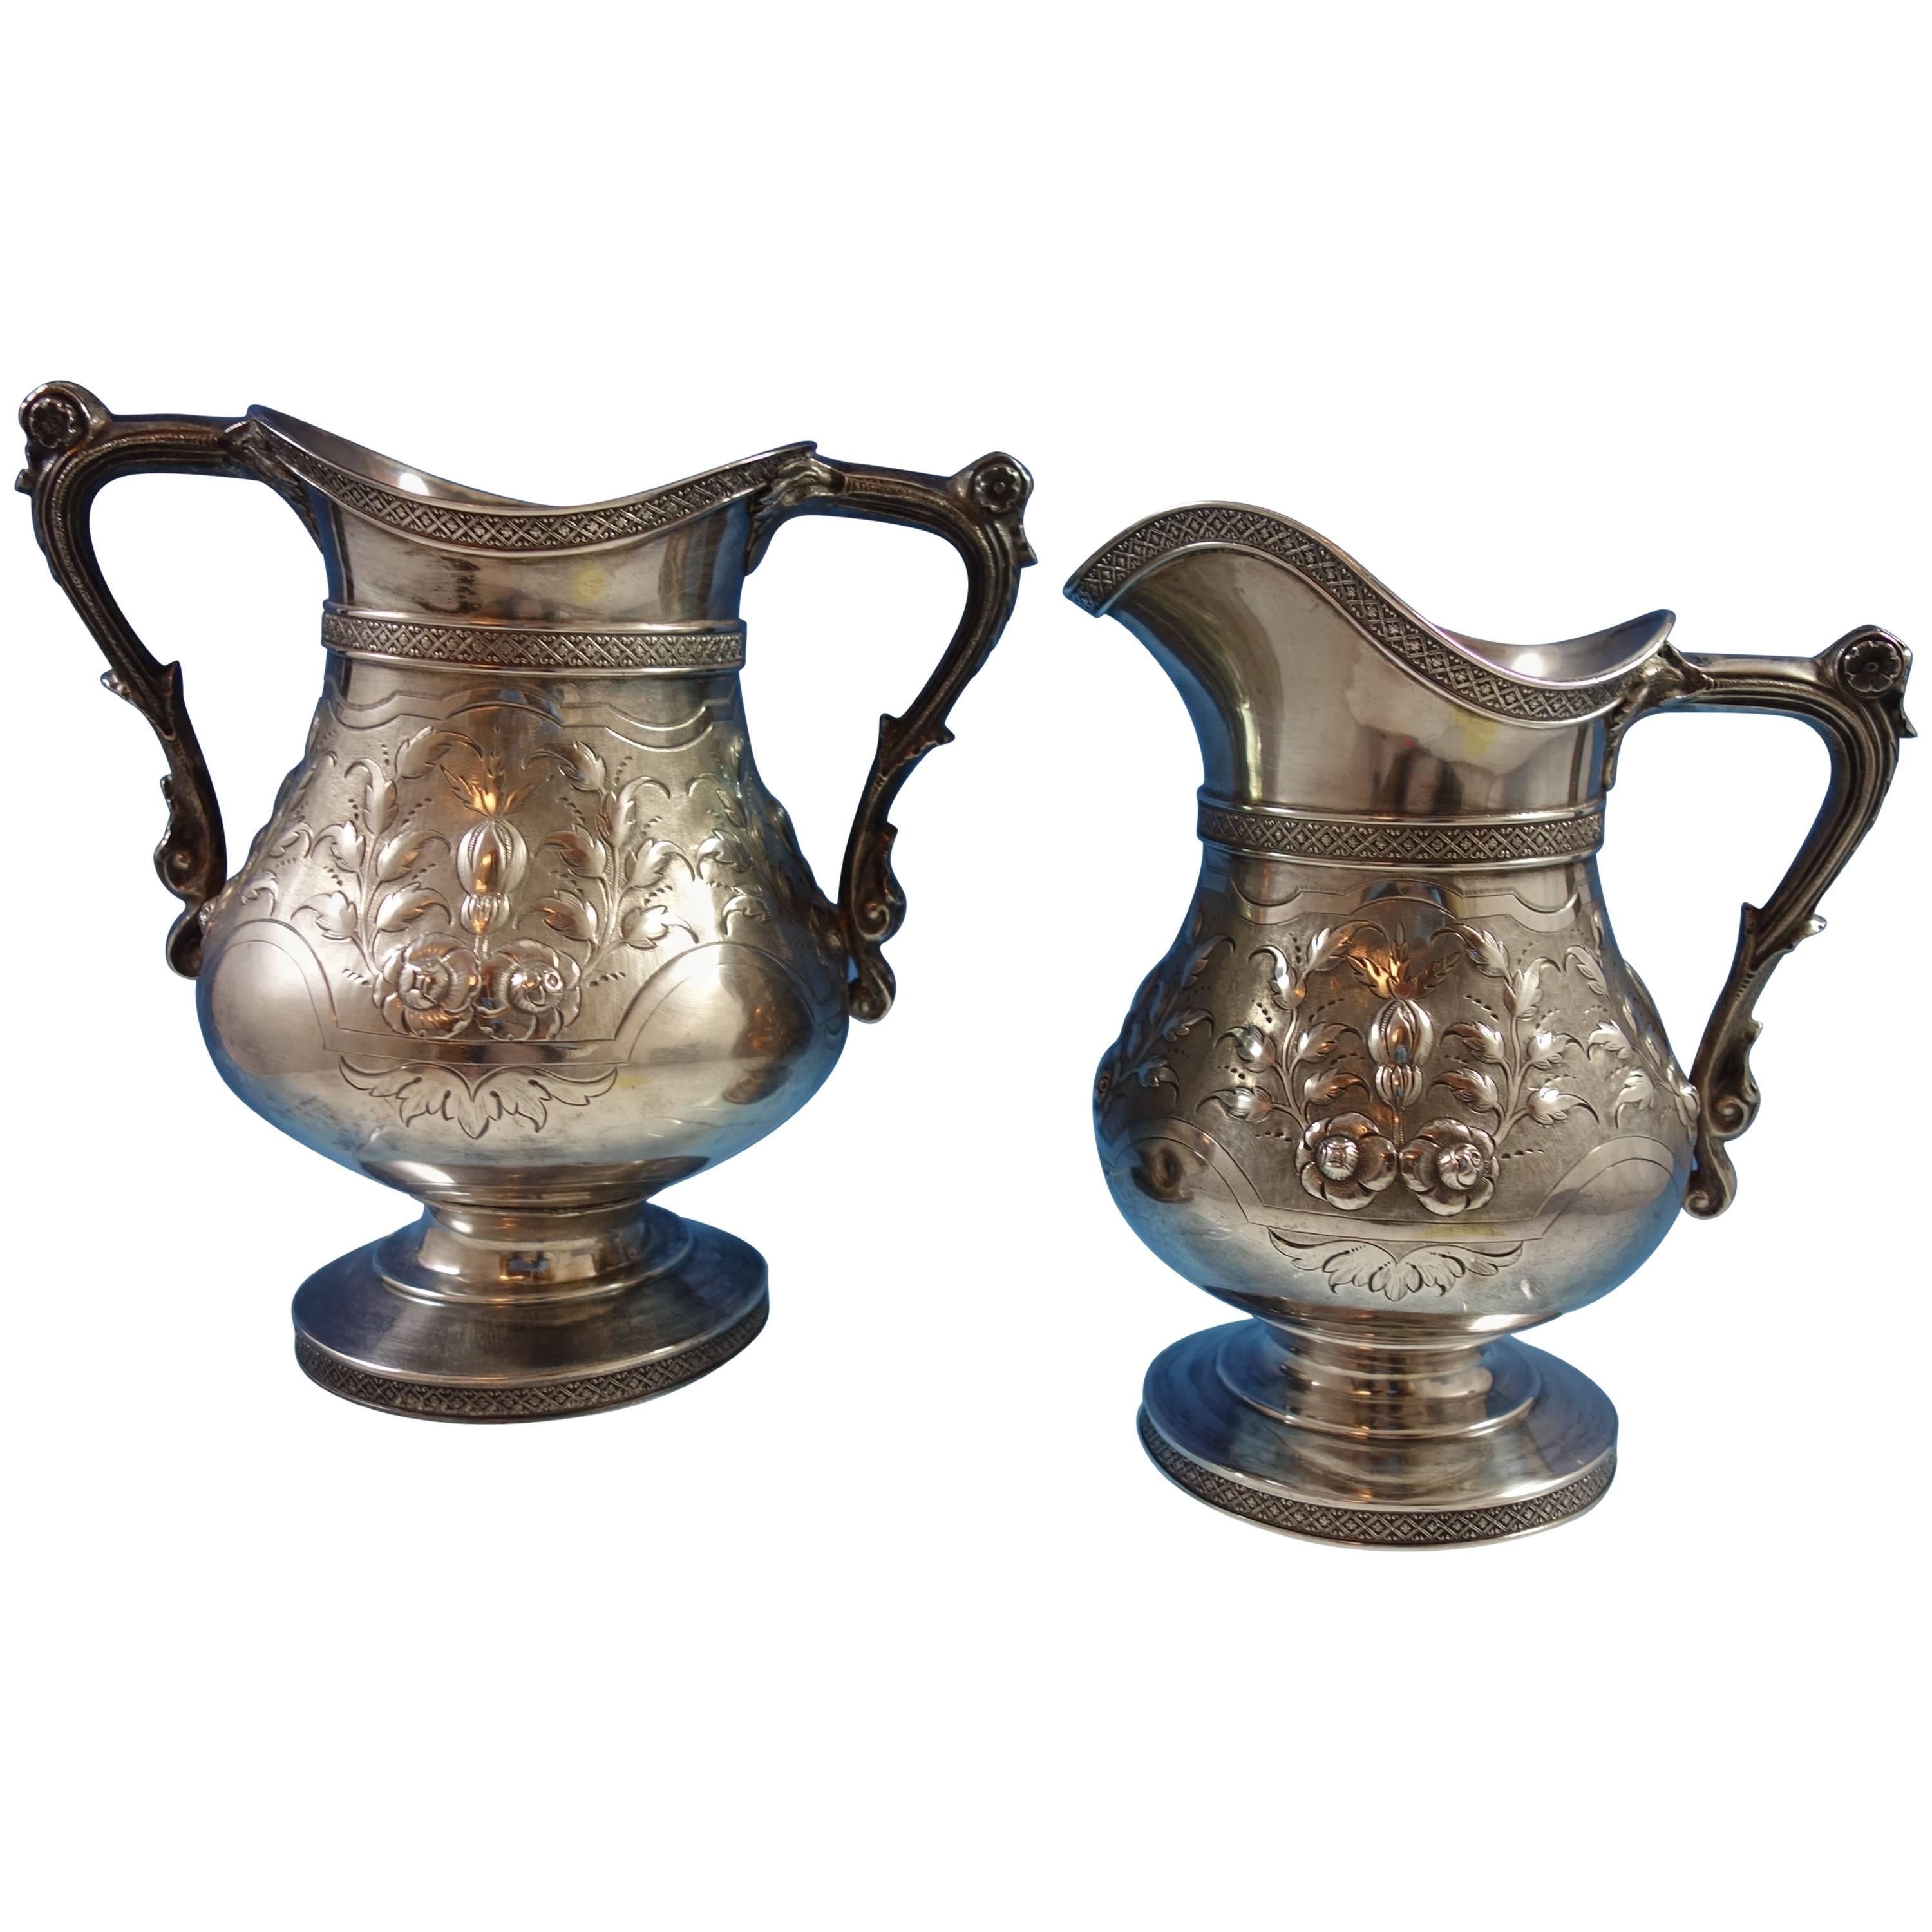 Duhme & Co. Sterling Silver Sugar and Creamer Set Repoussed Chased SKU #1916